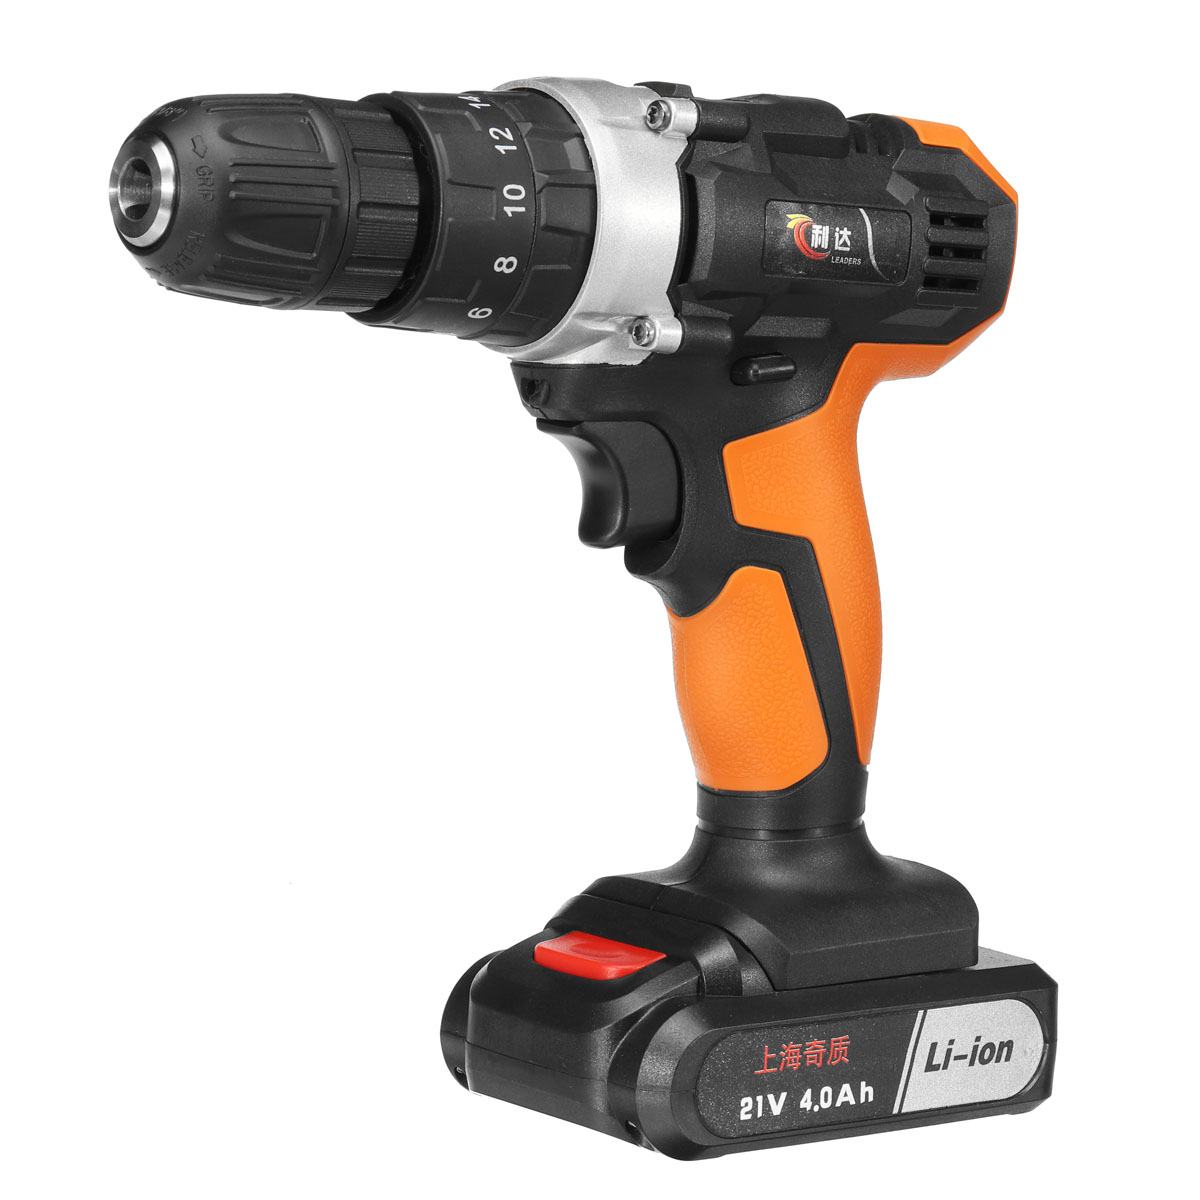 21V-4000mAh-Li-ion-Cordless-Electric-Impact-Drill-183-Clutches-2-Speed-Power-Drills-With-2-Batteries-1412172